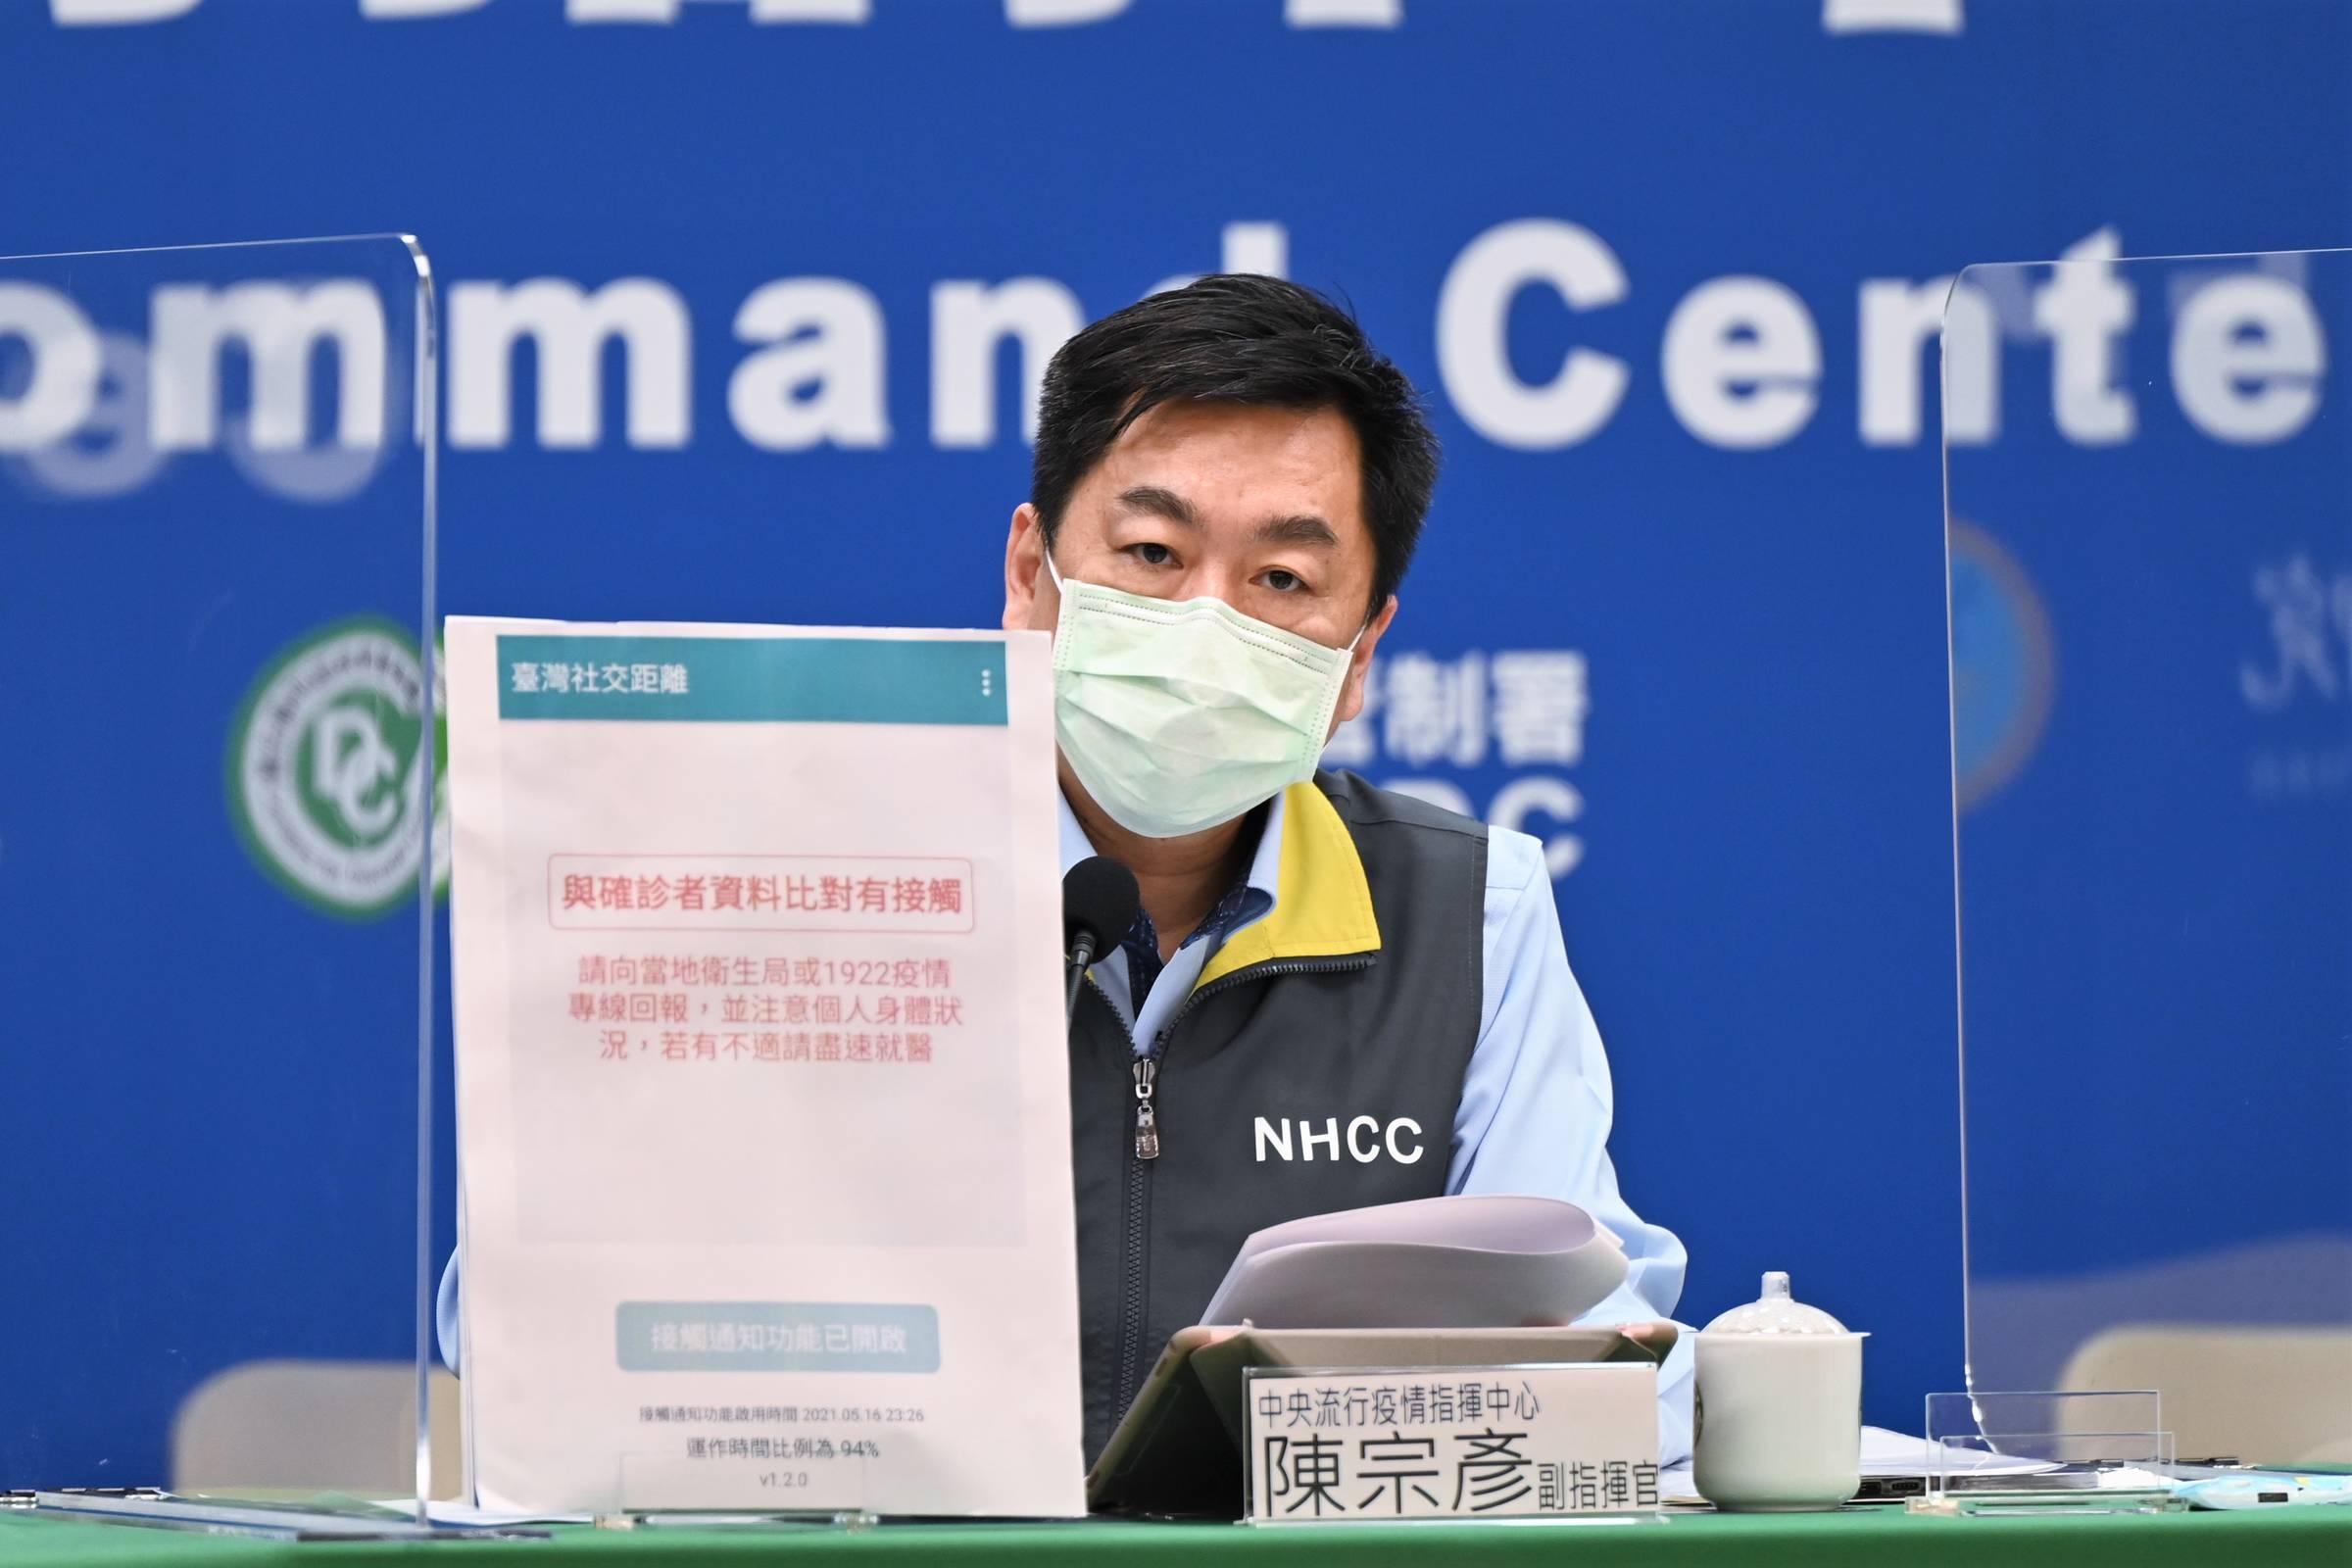 Chen Tsung-yen called on the public to pay attention to their health at all times. Photo / Provided by the CECC